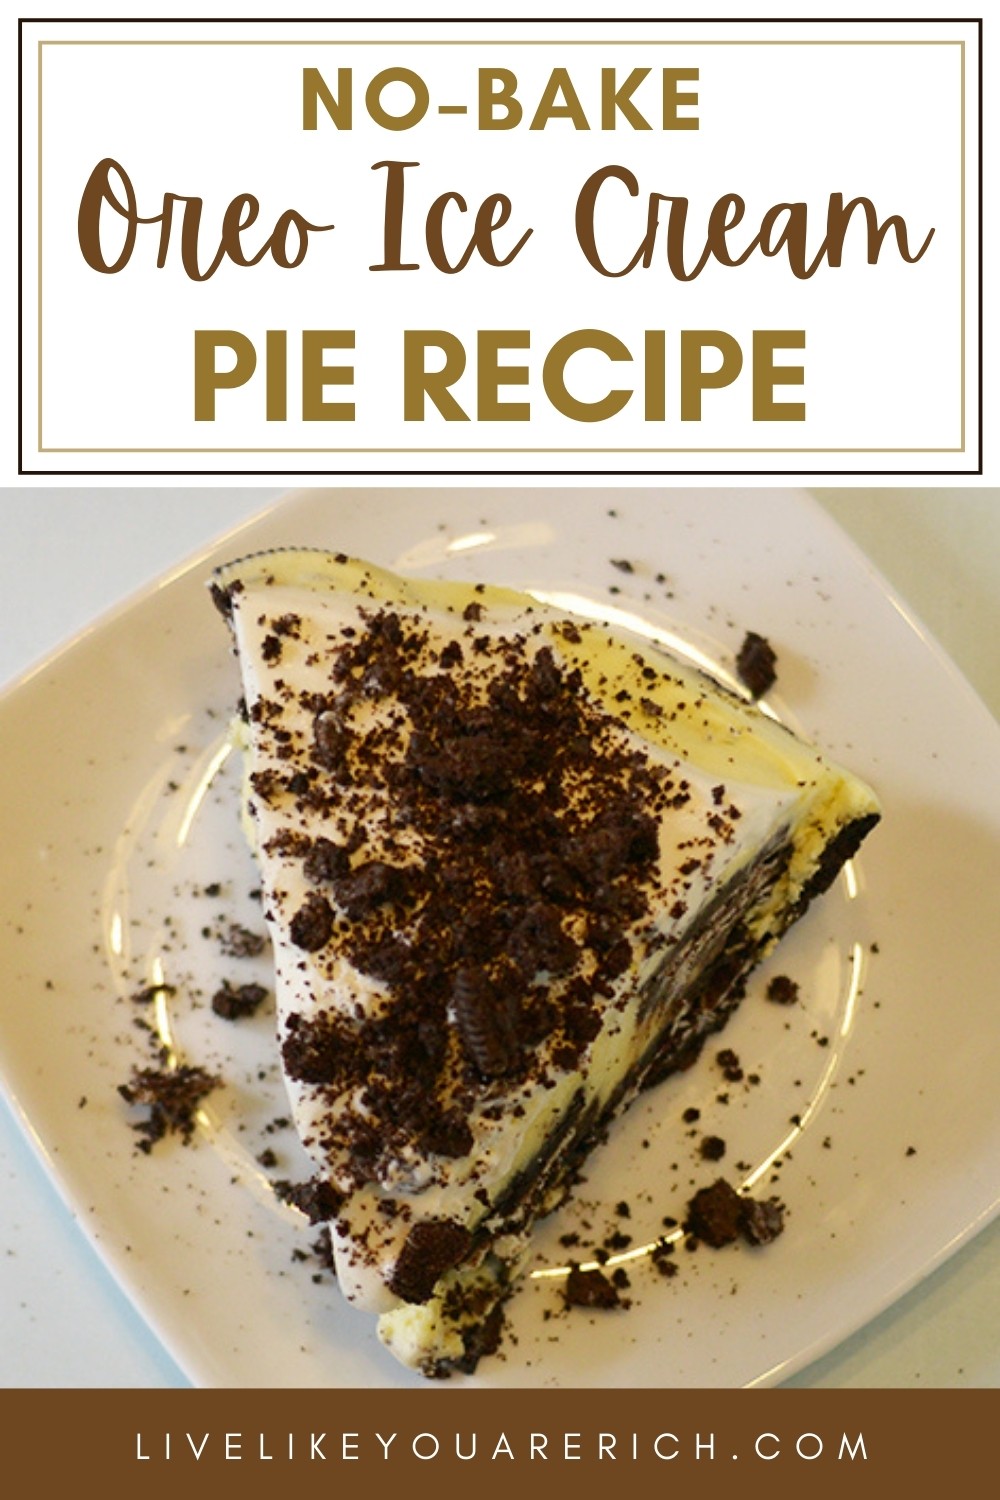 This super easy Oreo Ice Cream Pie recipe is so easy to make, quick, and absolutely delicious. It can be served very cold or frozen. I personally like it frozen because it is like an ice cream cake but instead it is an ice cream pie. #oreoicecream #pie